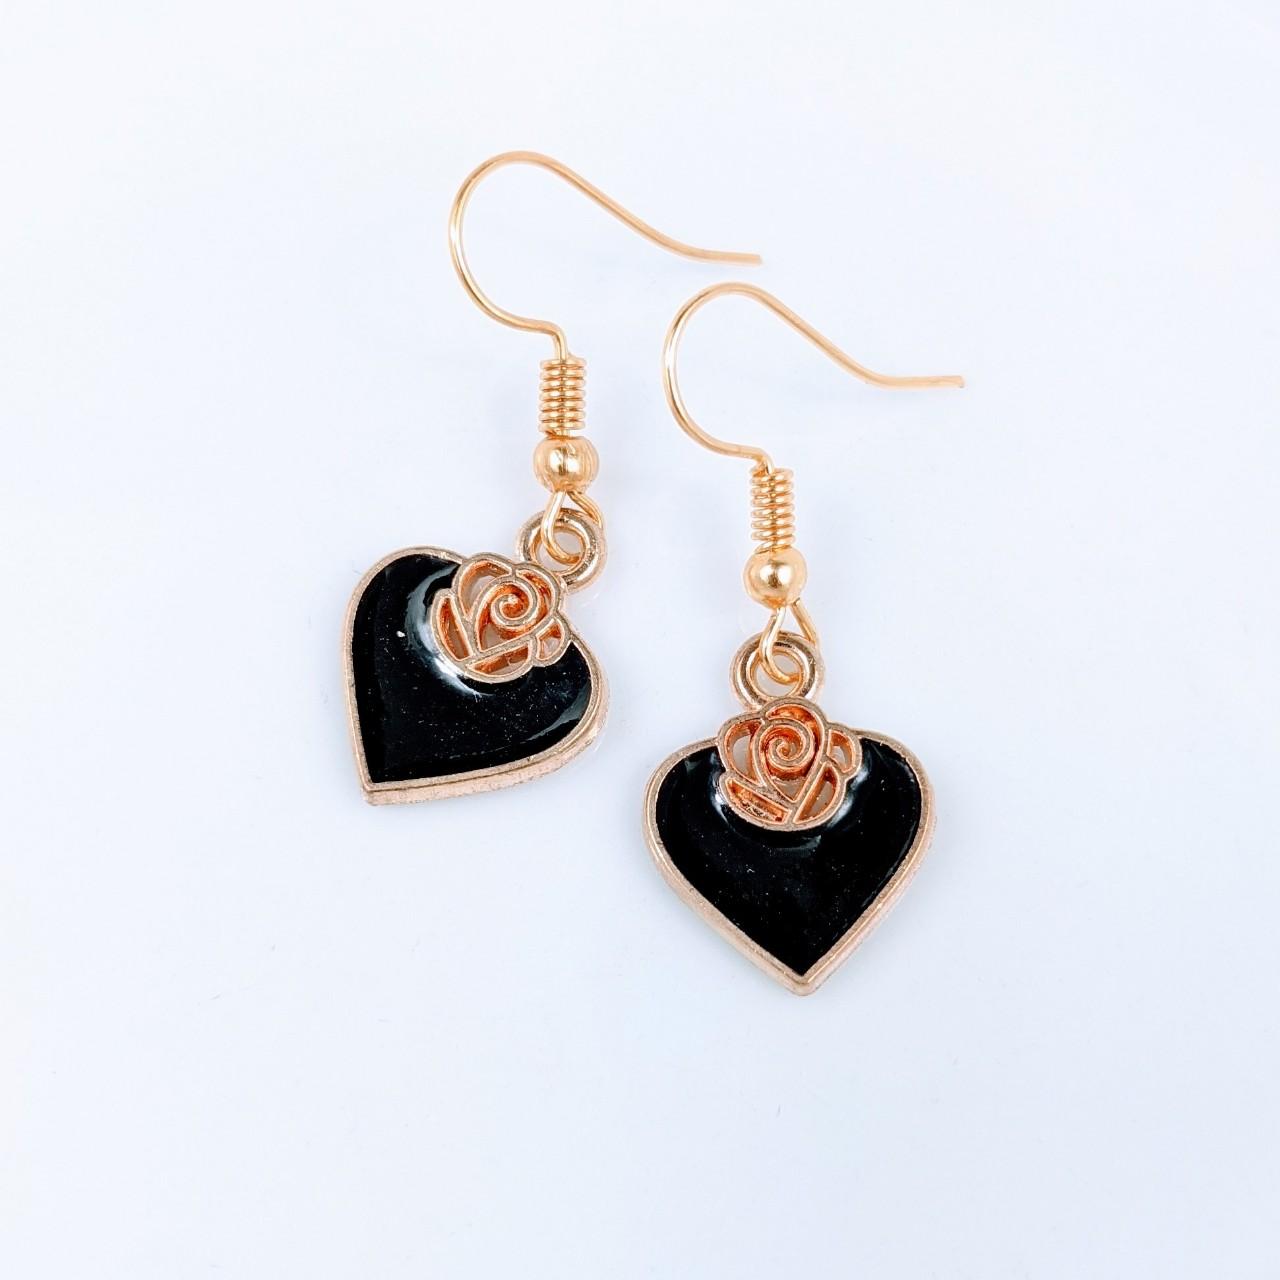 Product Image 1 - Black Heart Earrings
Brand new. 

Made